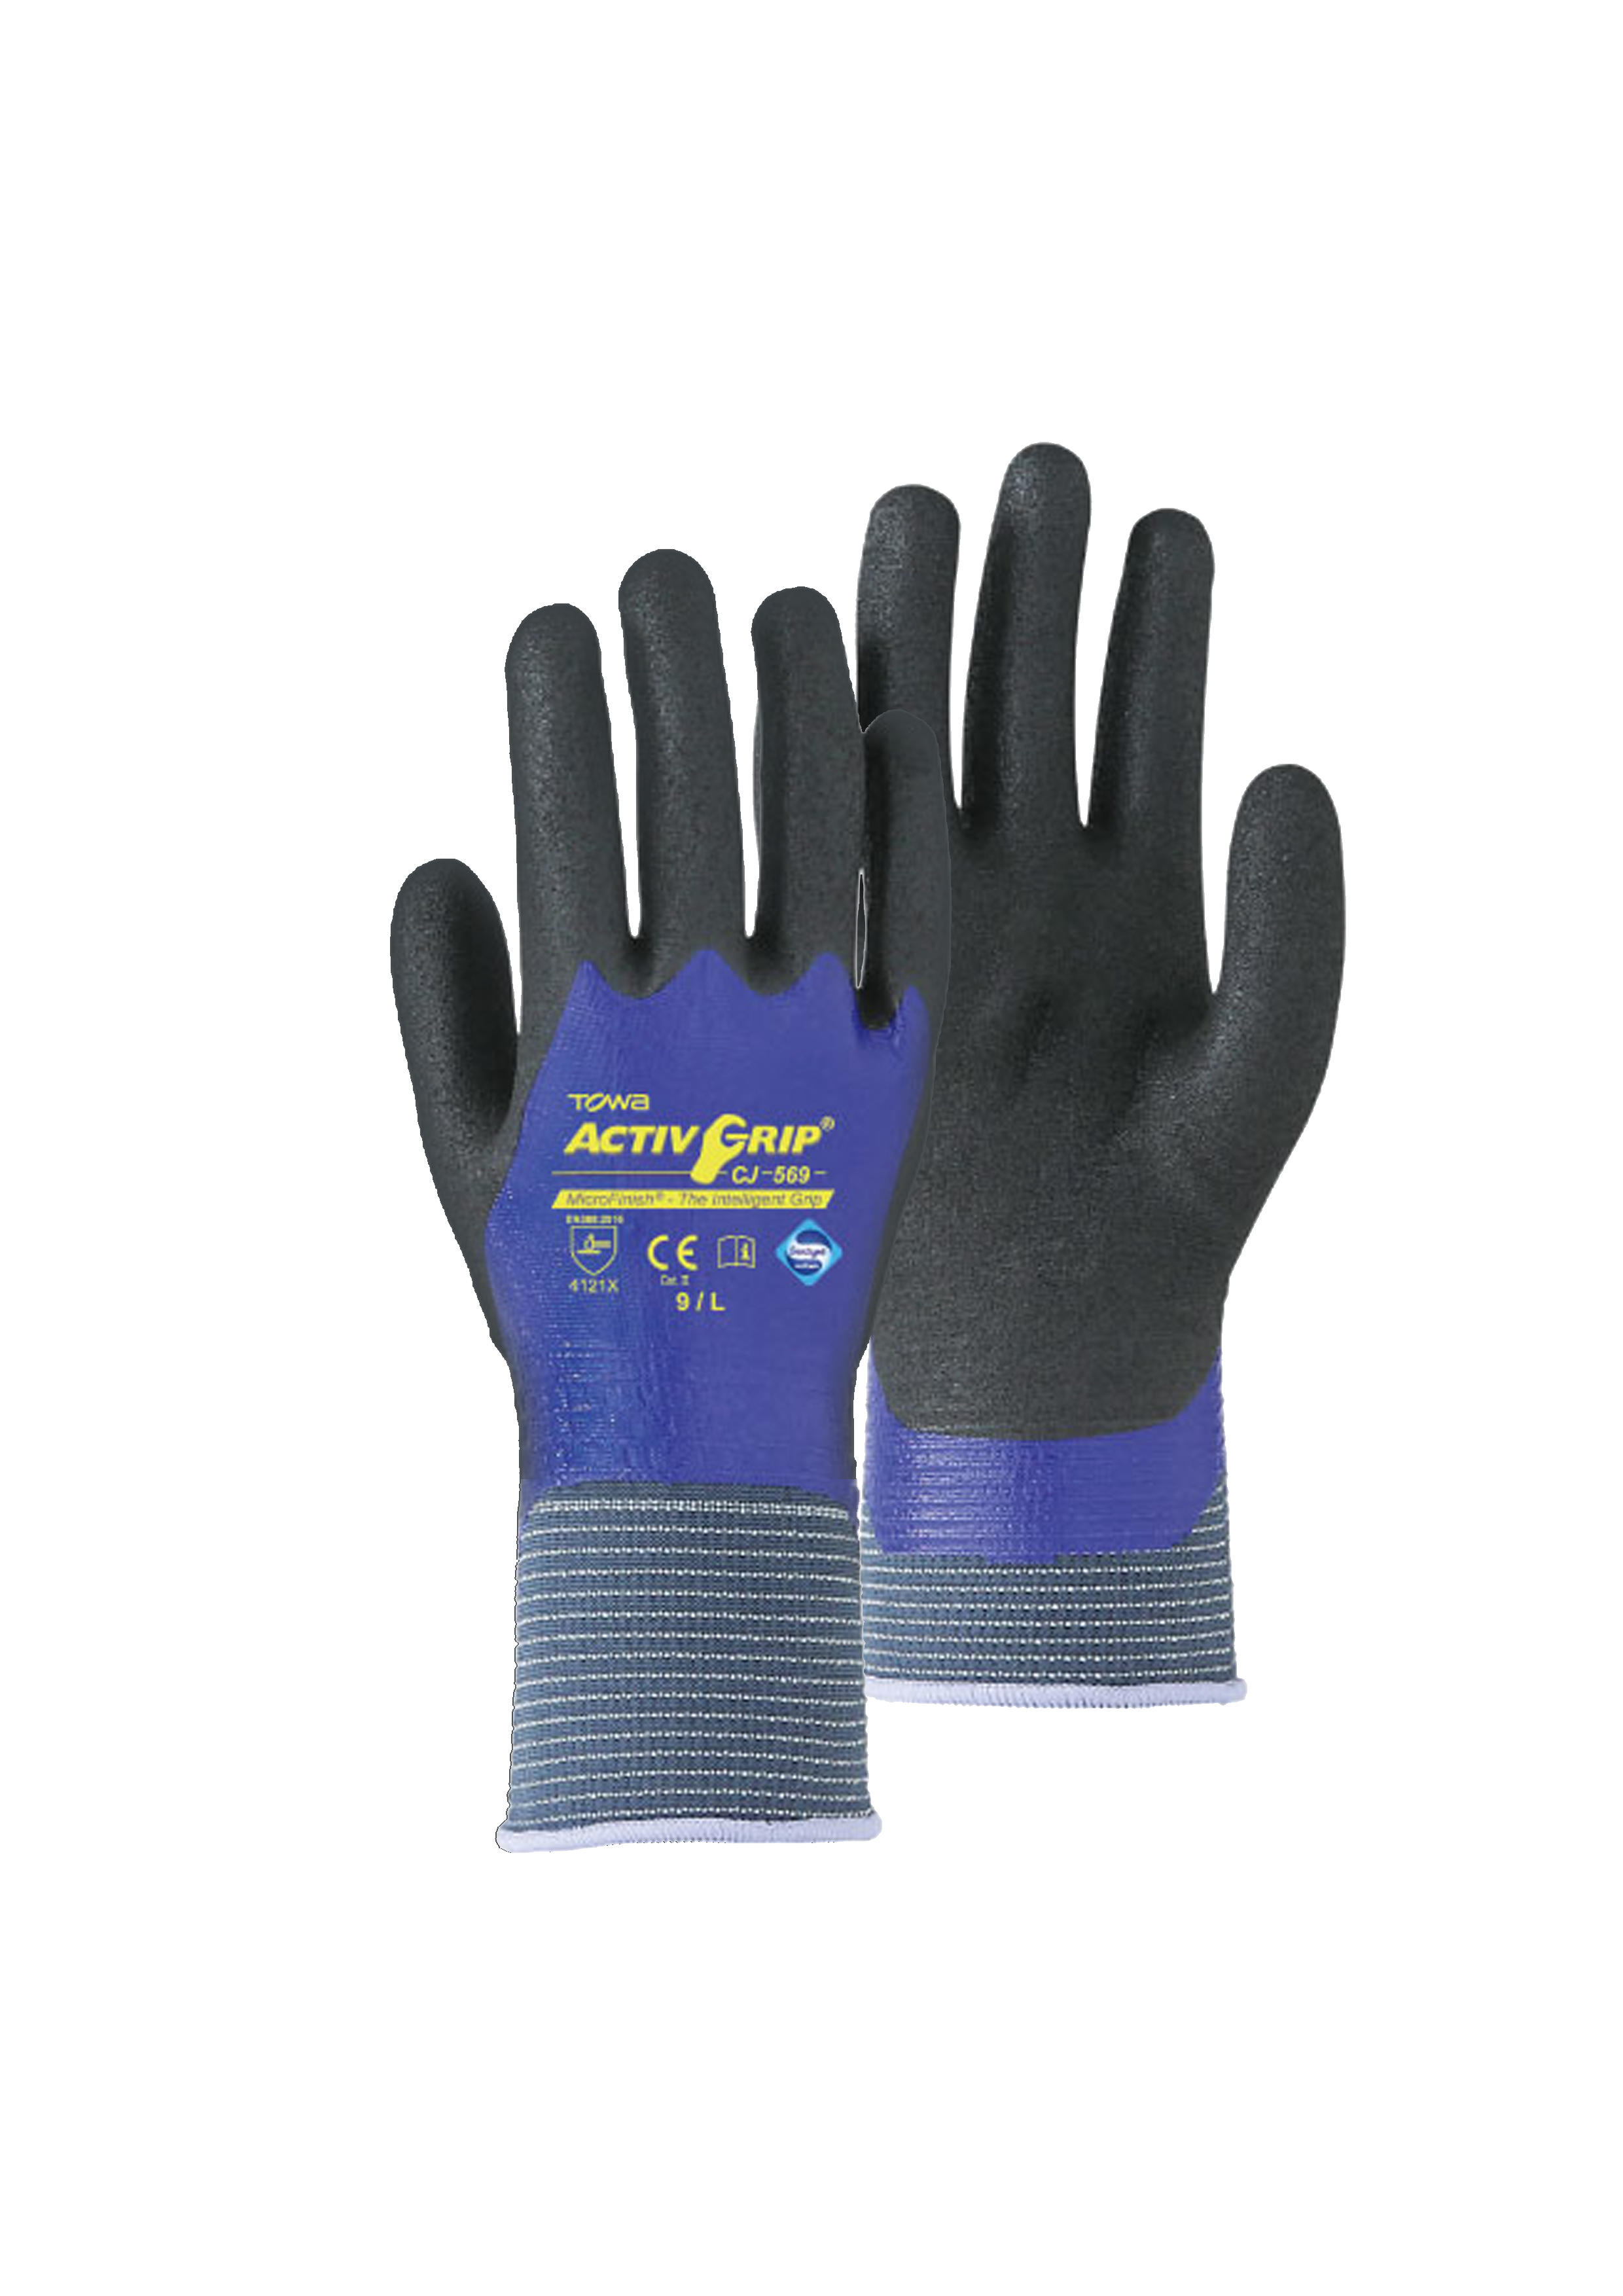 NEW PRICE CARDED Towa Activgrip Double Dipped Nitrile Large